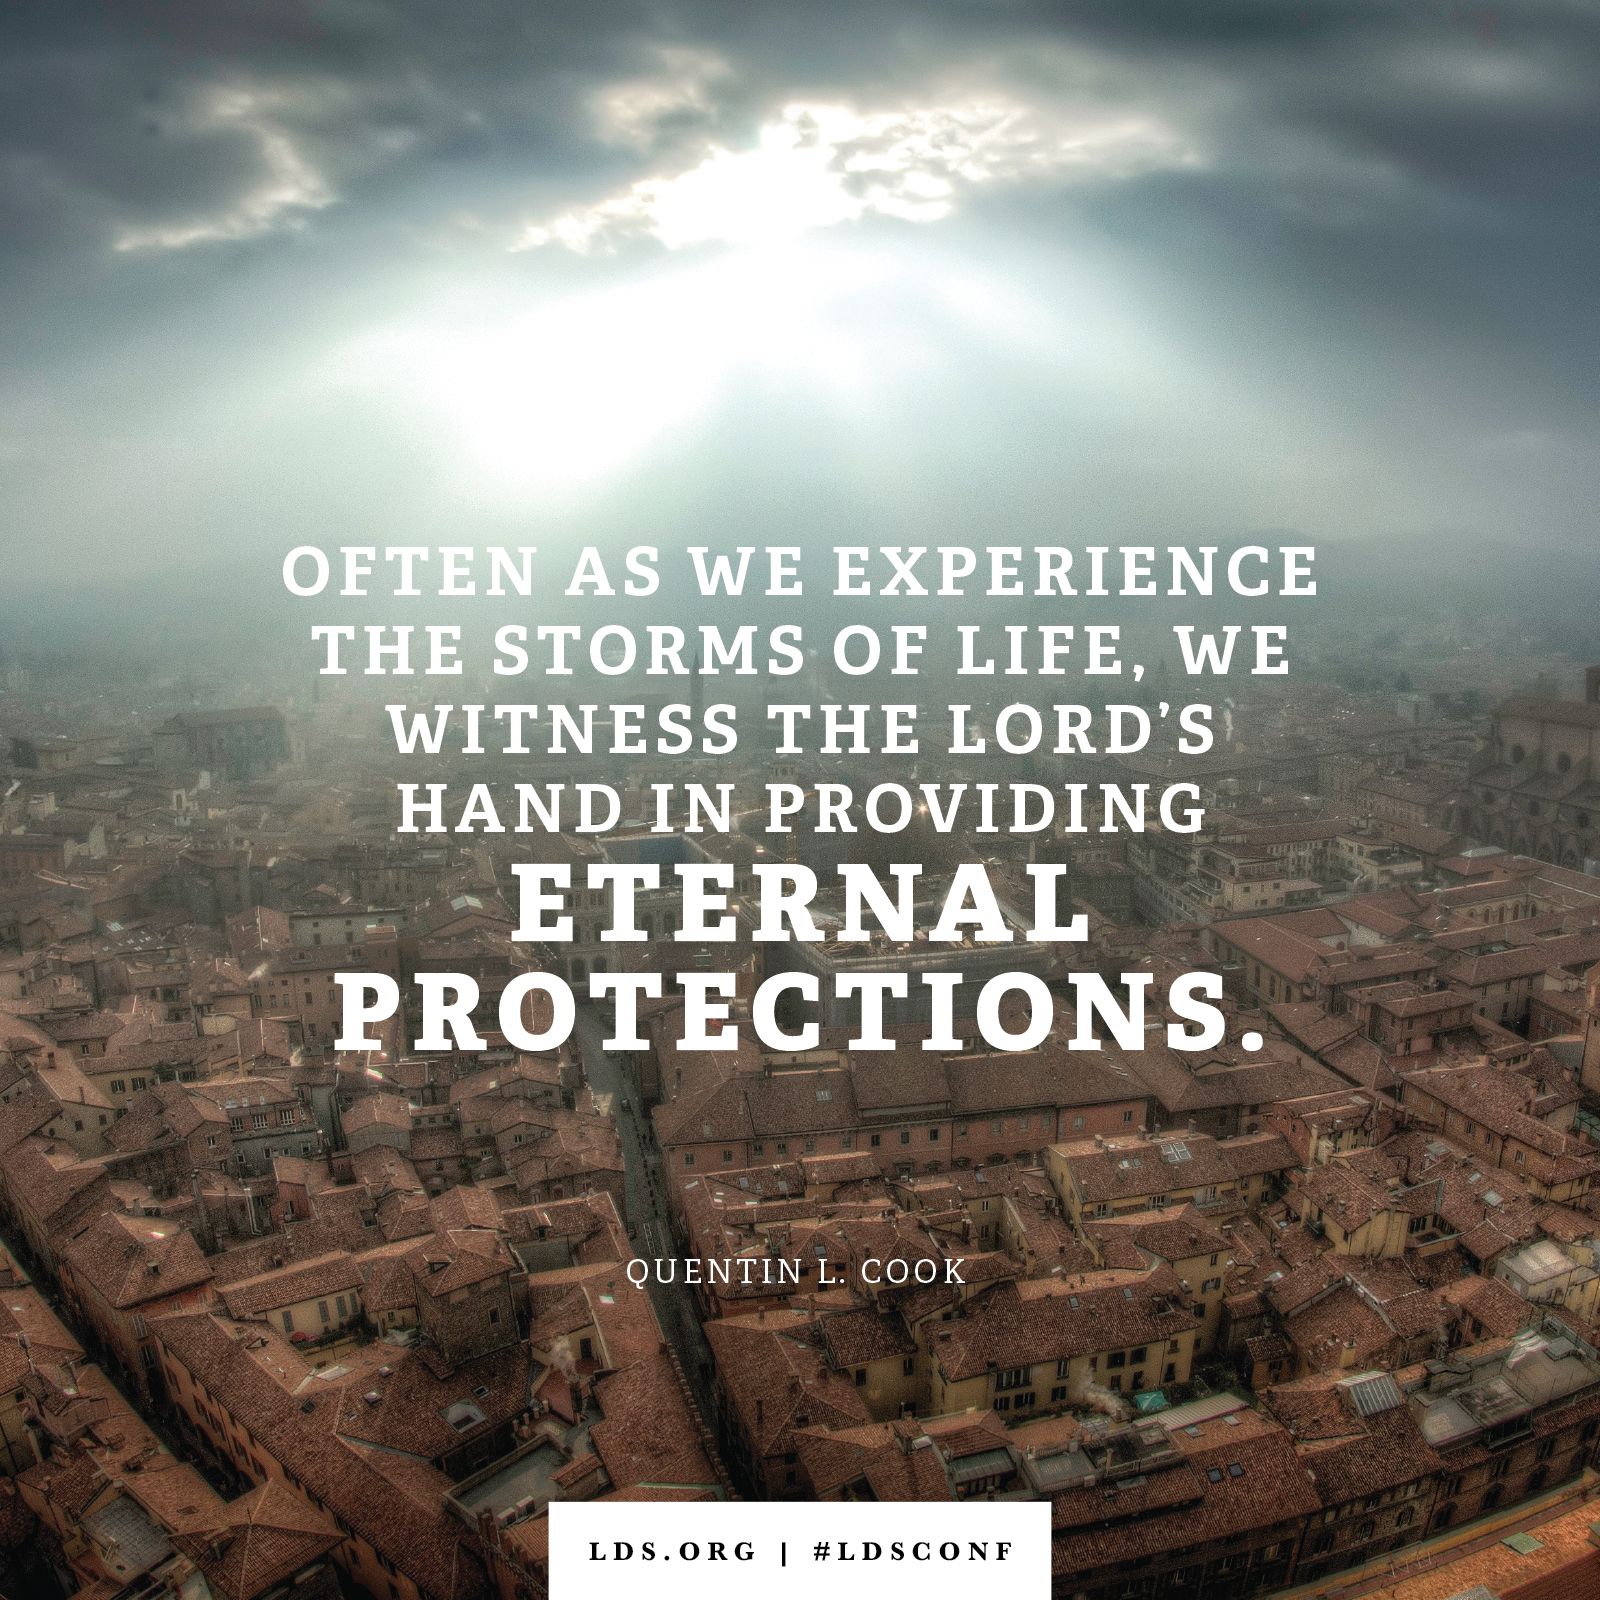 “Often as we experience the storms of life, we witness the Lord’s hand in providing eternal protections.” —Elder Quentin L. Cook, “See Yourself in the Temple”